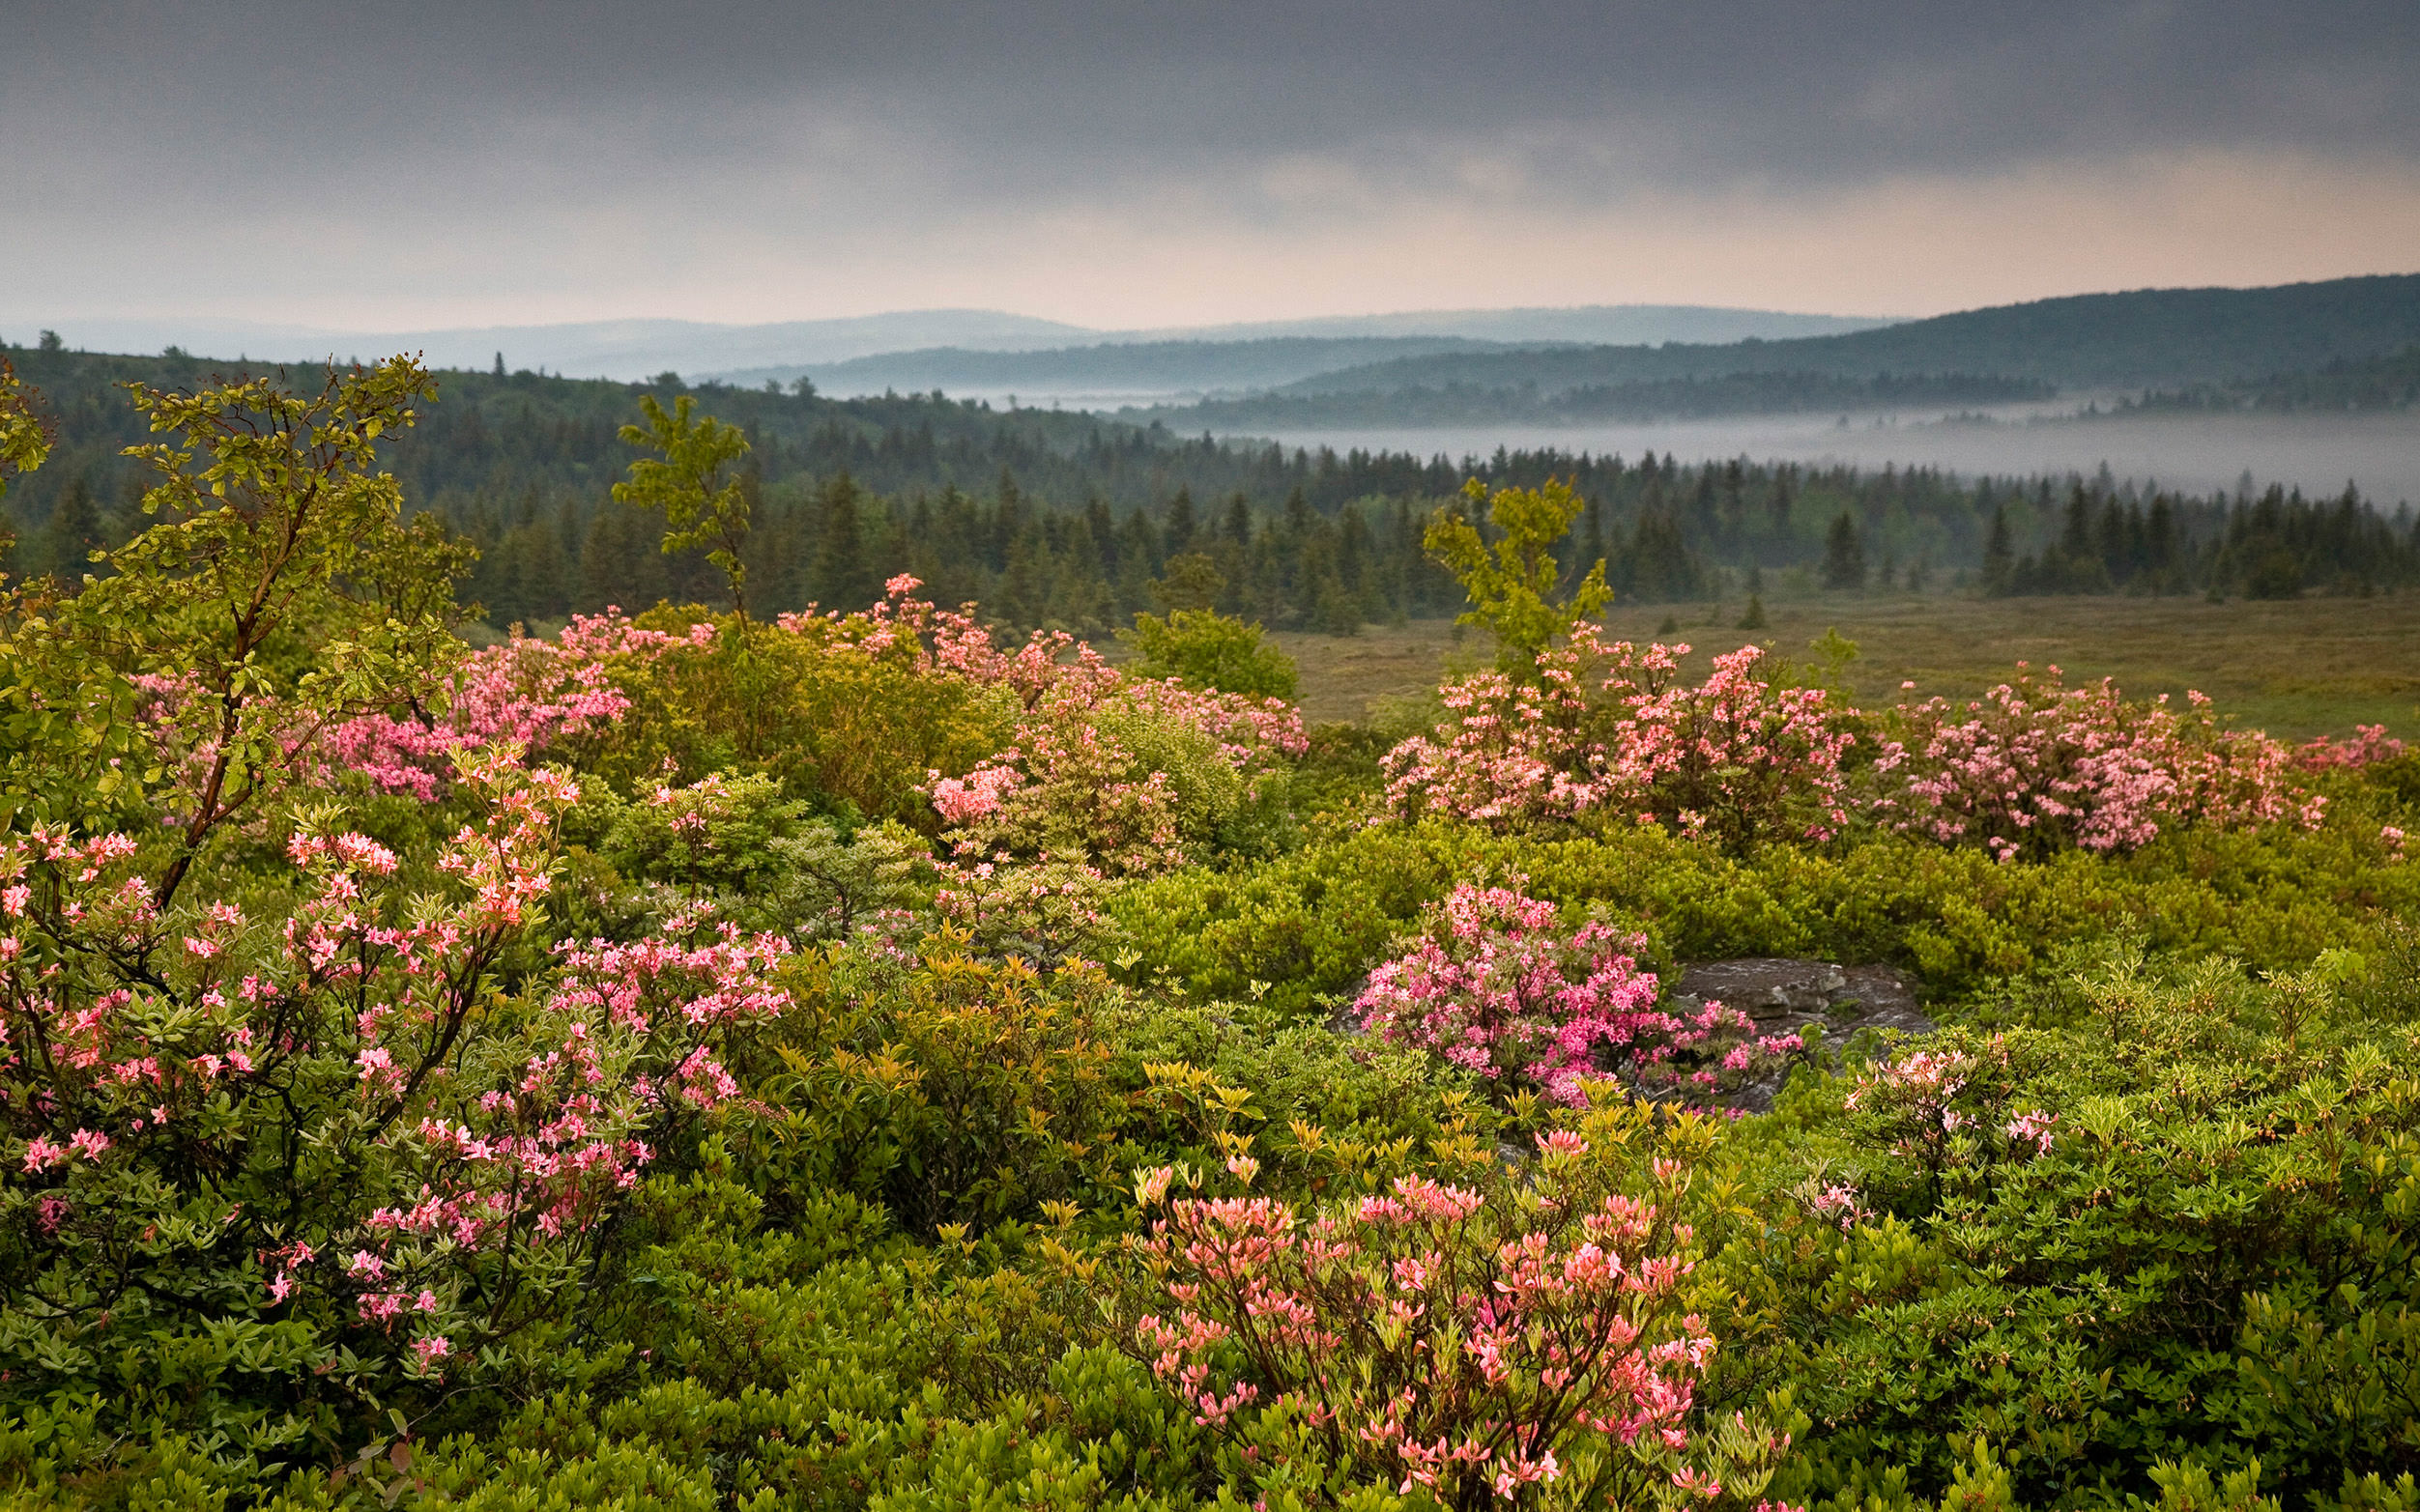 A field of pink mountain laurel in bloom with forest, mountains, and mist in the background.